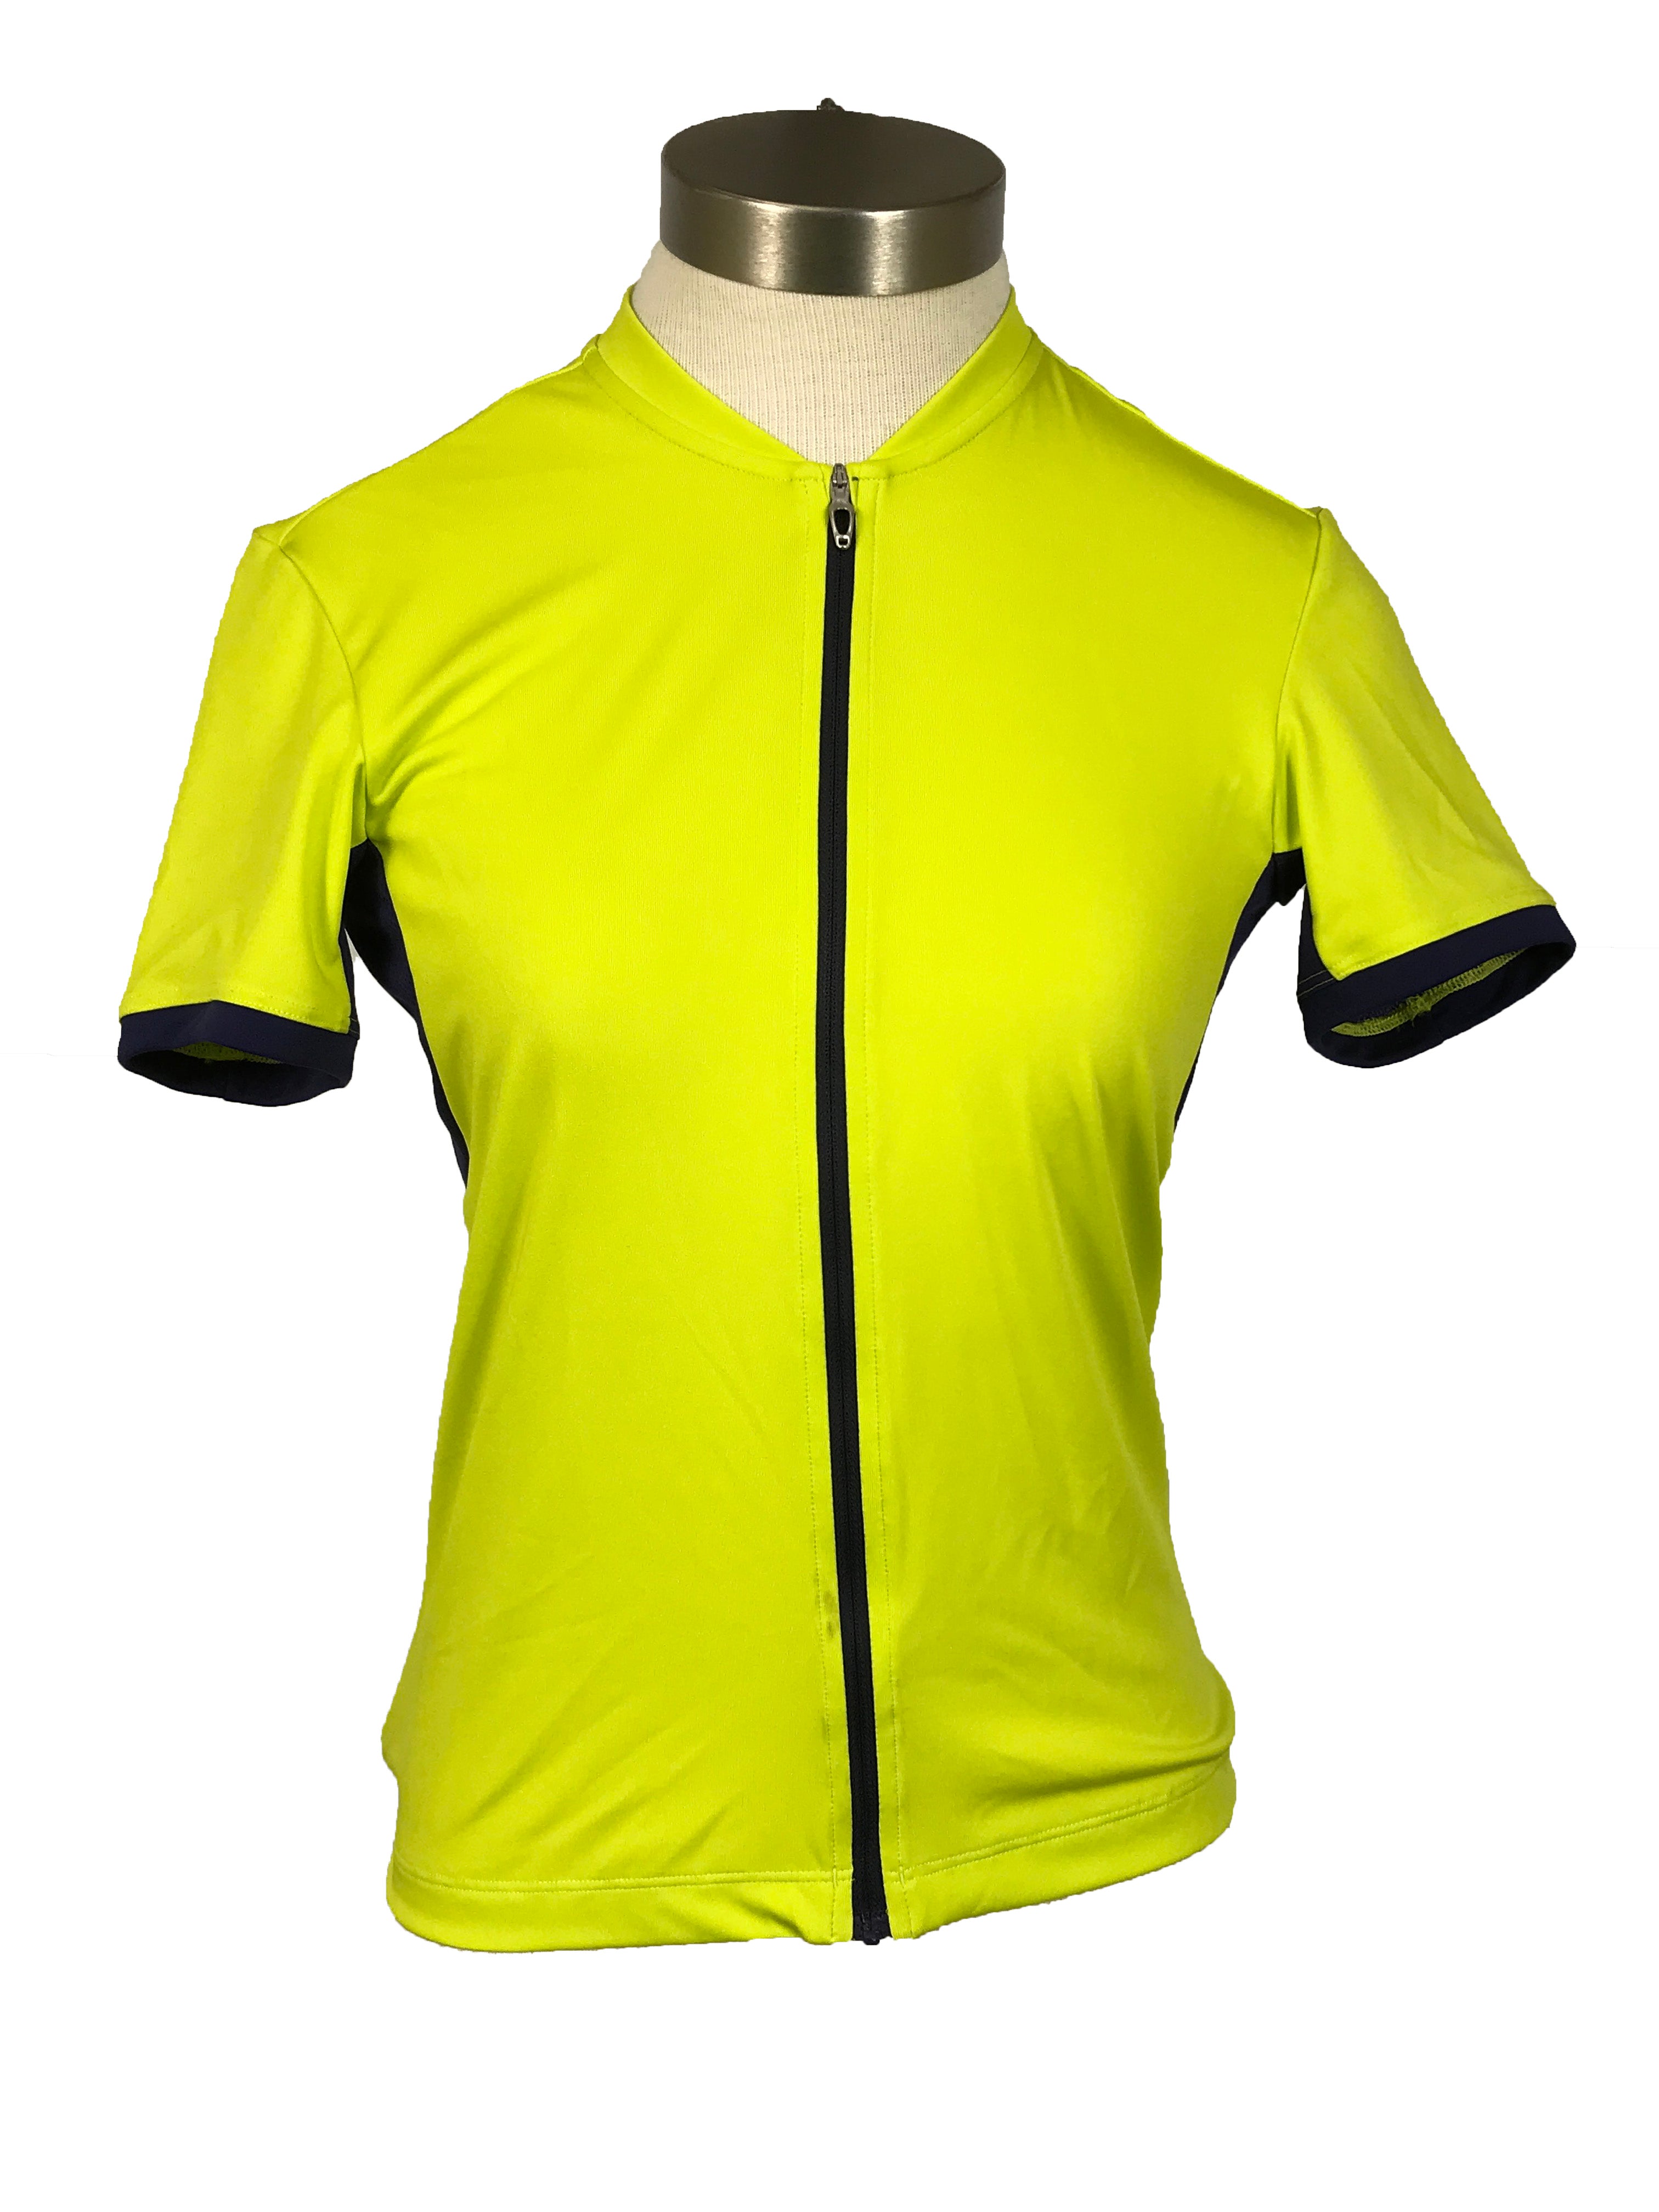 Specialized RBX Sport Limon Short Sleeve Jersey Women's Size S NWT